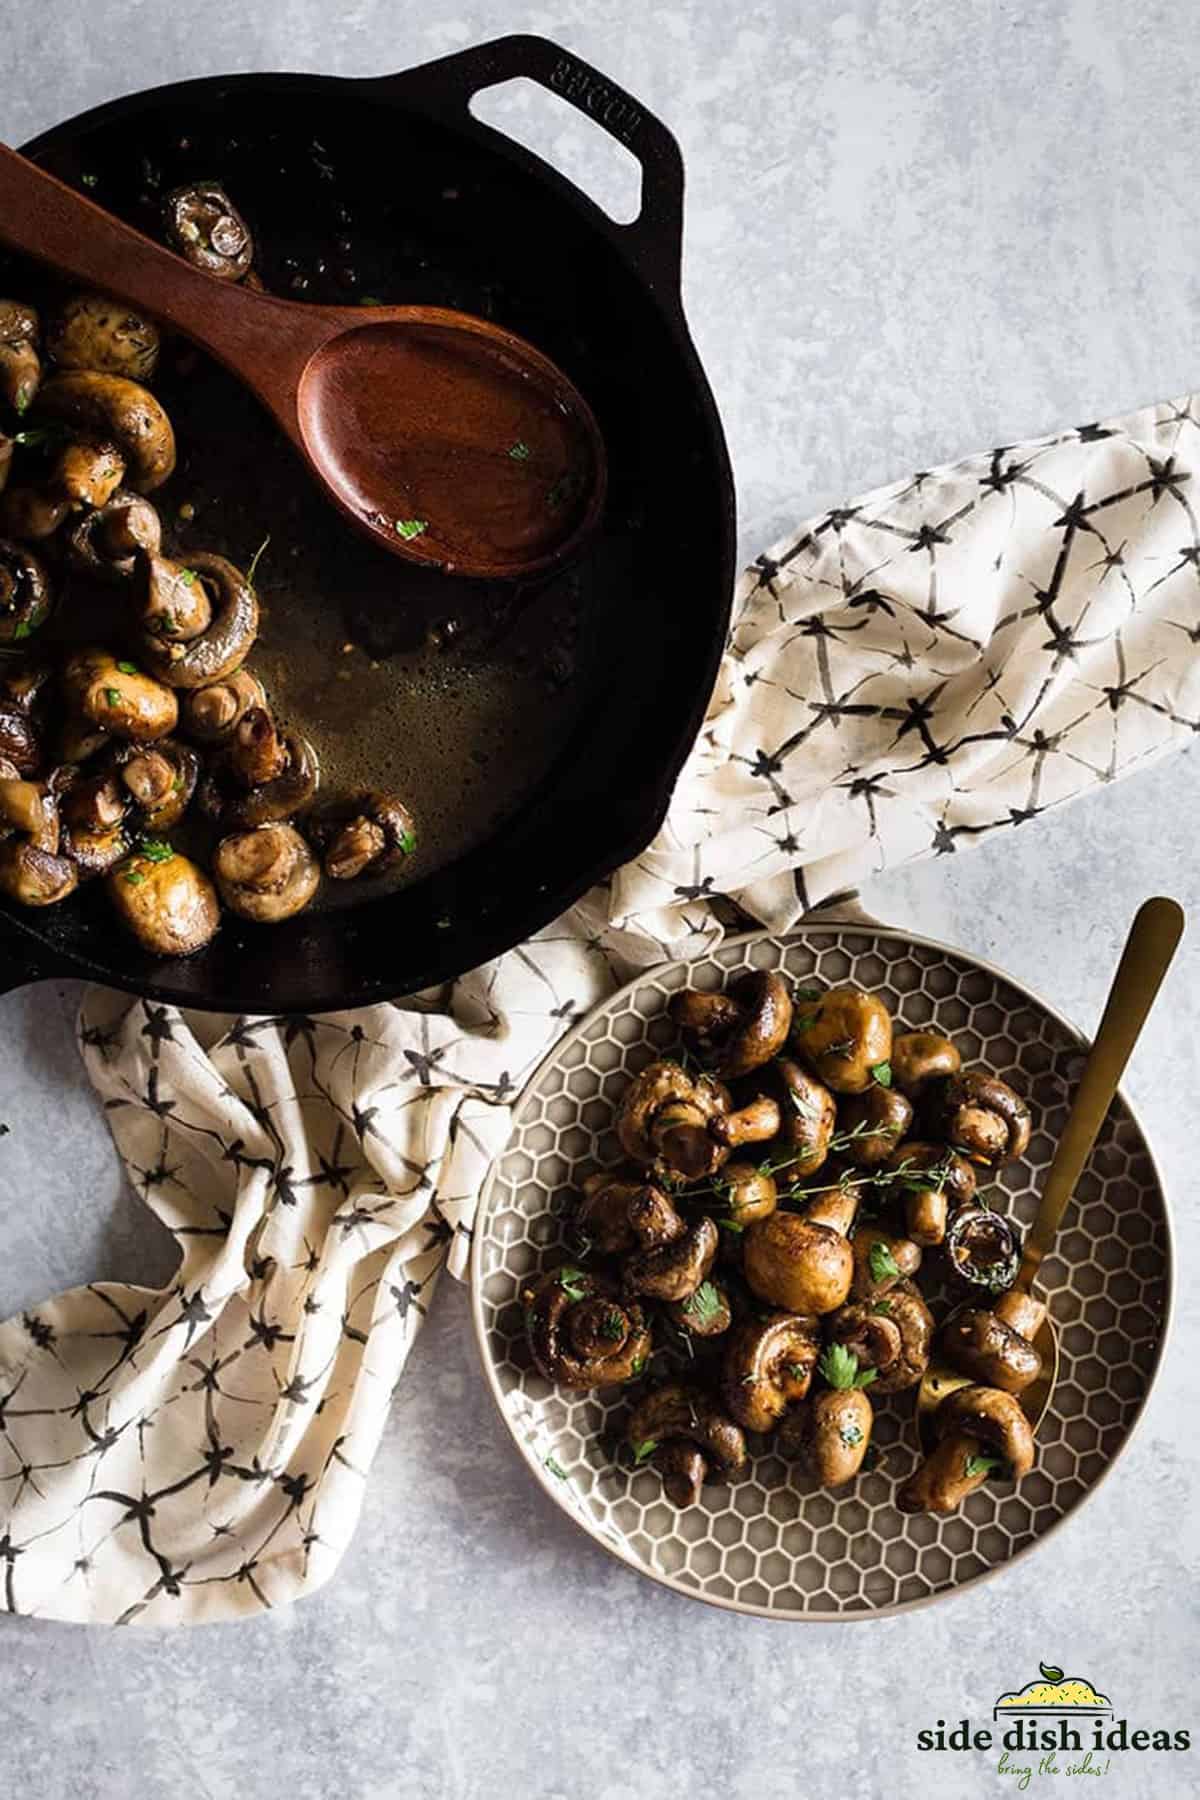 white button mushrooms in a pan next to a plate of mushrooms with herbs